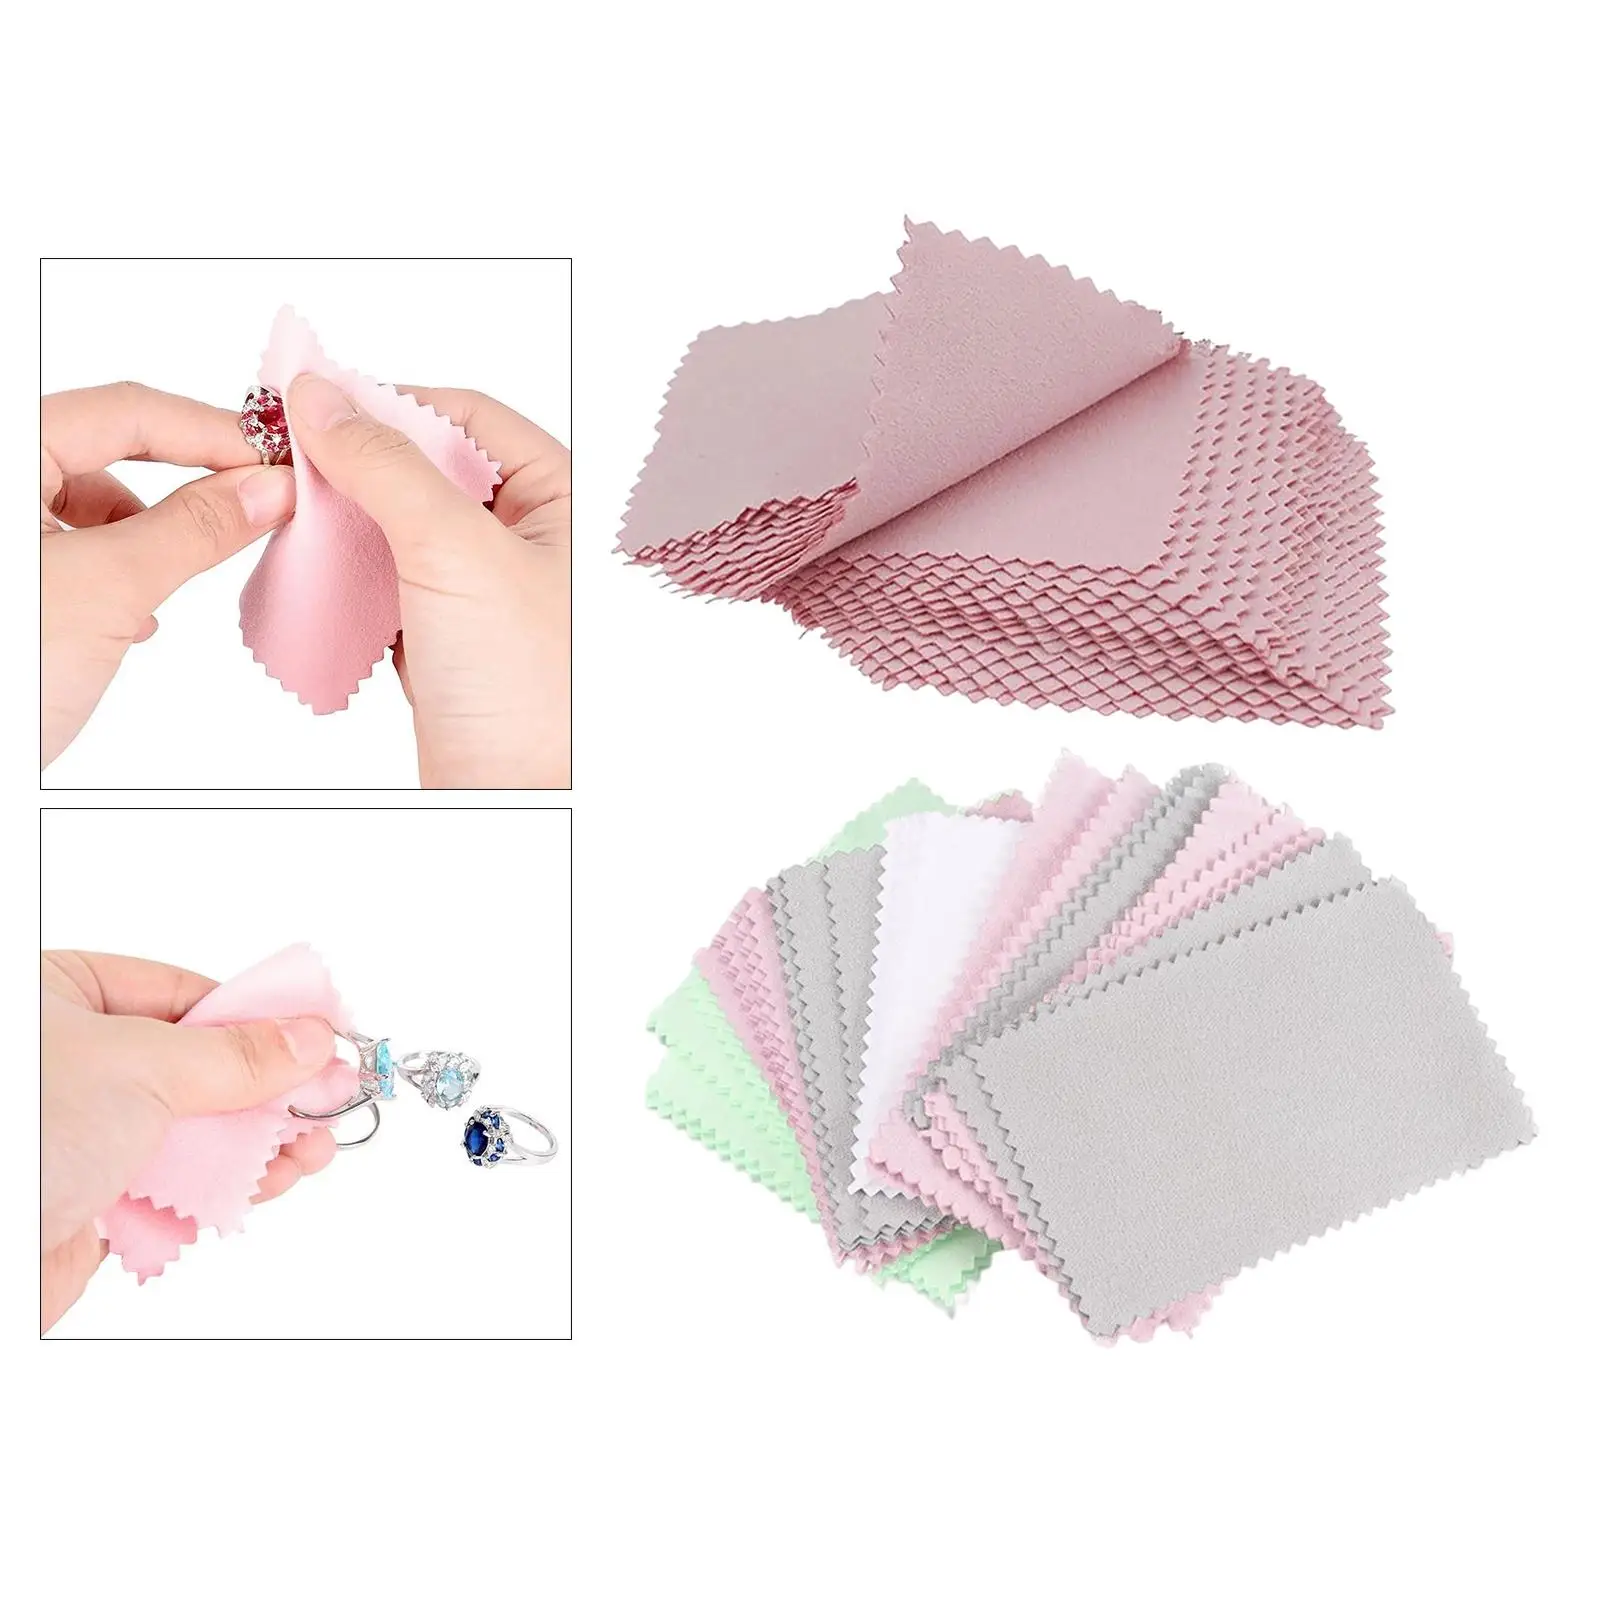 50 Pack Jewelry Cleaning Polishing Cloth 8x8cm Portable Square Maintenance Cloth Napkins for Watches Rings Lens Glasses Gold